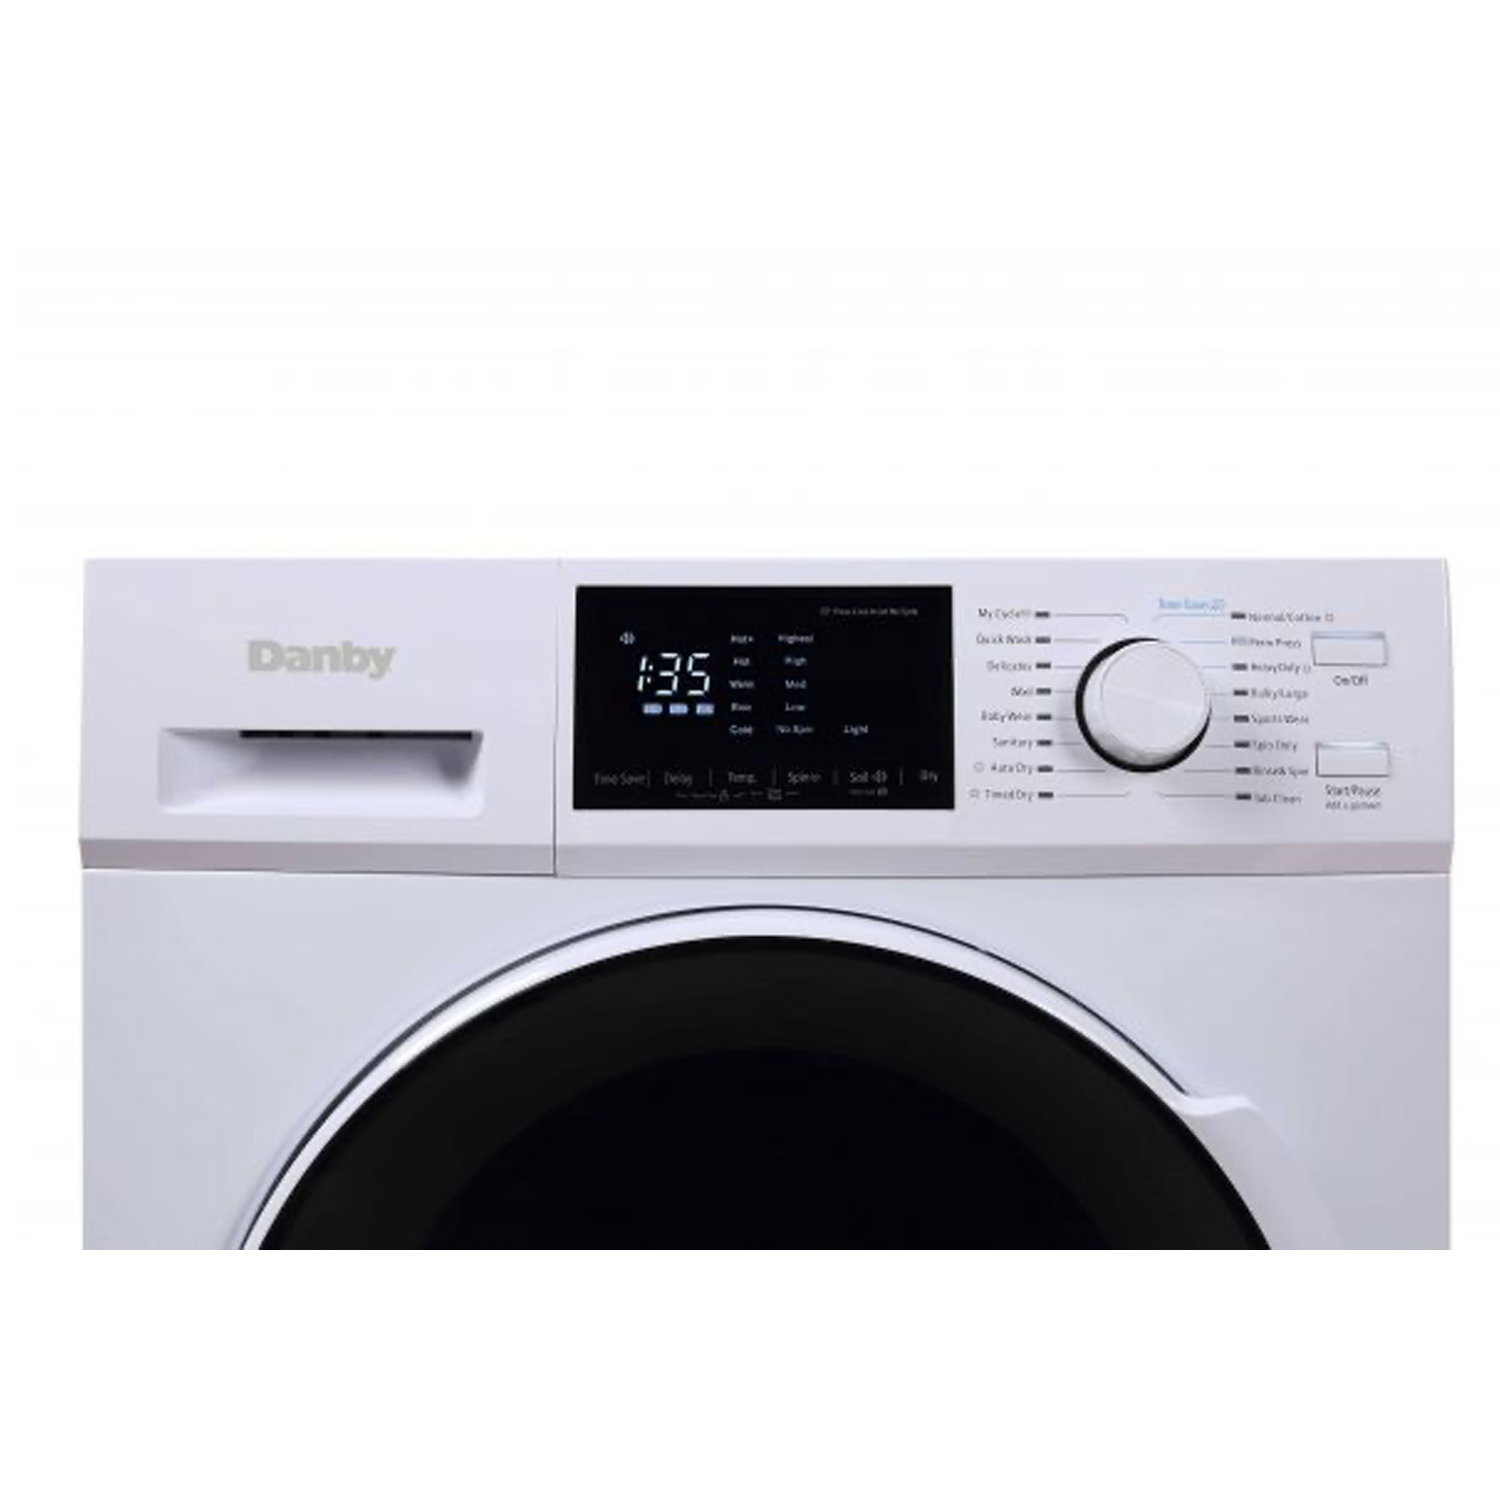 Danby DWM120WDB-3 2.7 cu. ft. All-In-One Ventless Washer Dryer Combo, White | eBay